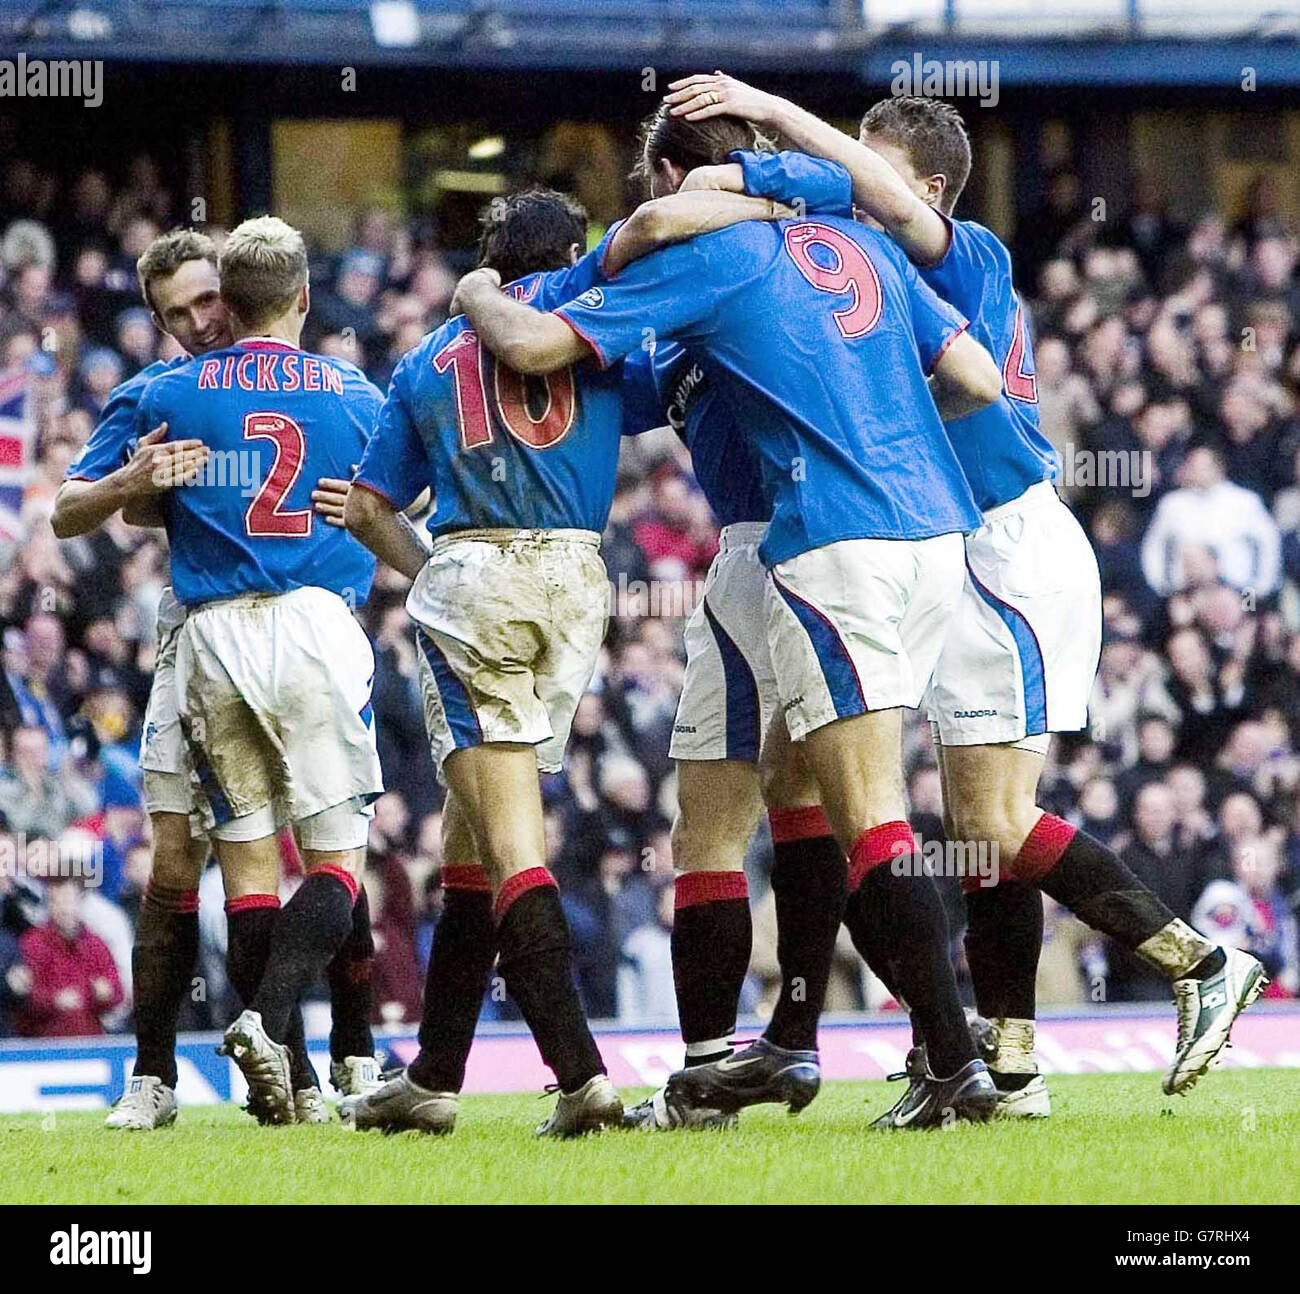 Soccer - Bank Of Scotland Premier Division - Rangers v Hibernian - Ibrox Stadium. Dado Prso (number 9) celebrates with his team mates after scoring his team's second goal against Hibernian Stock Photo